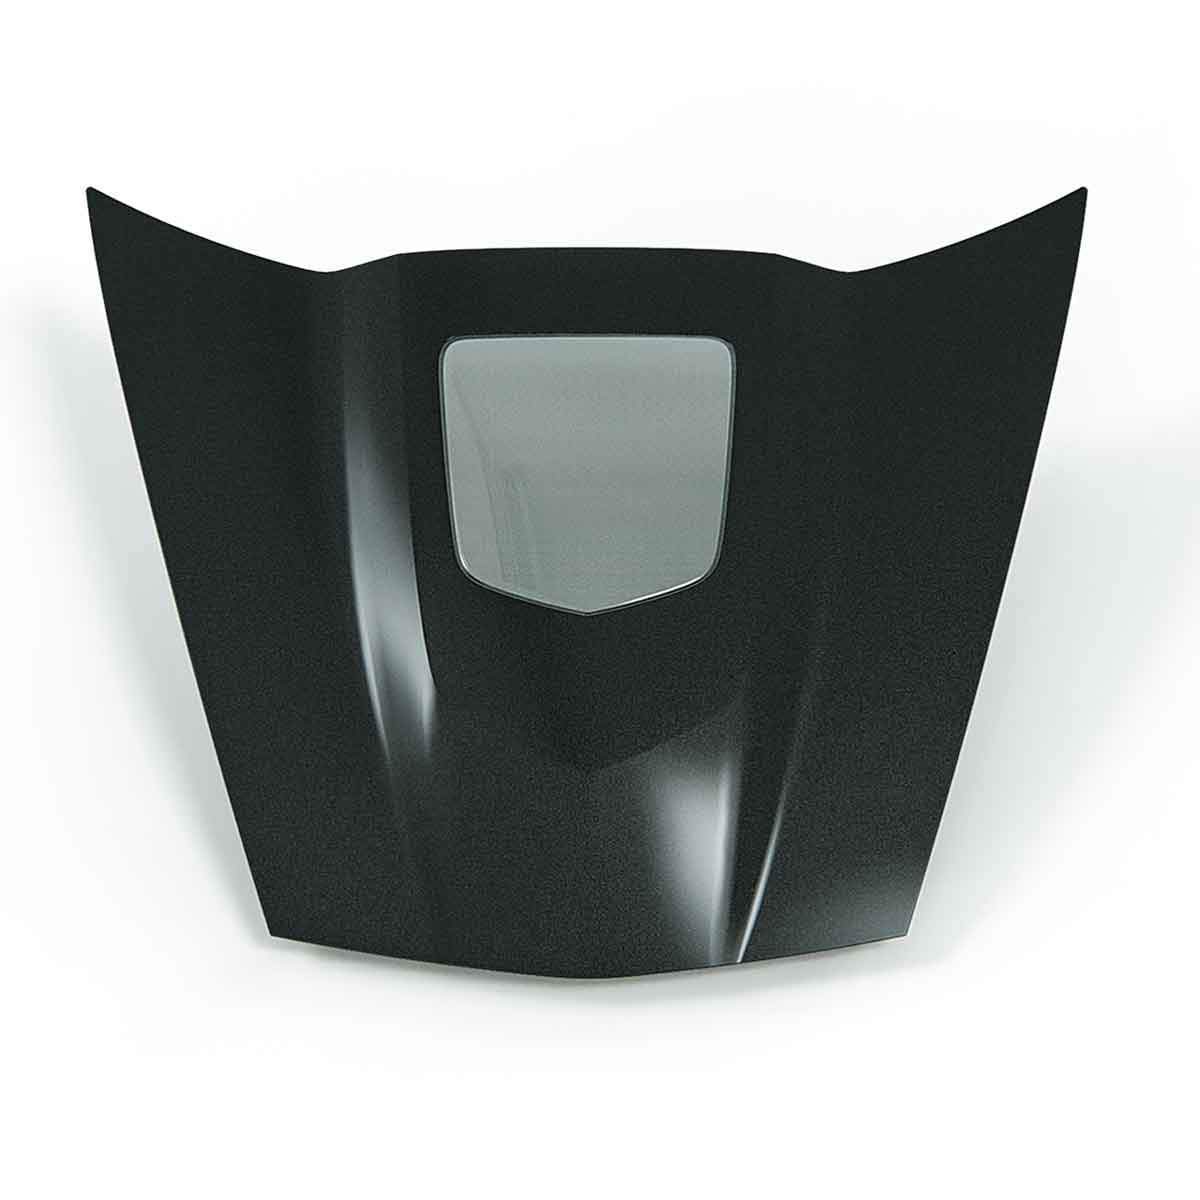 C6 ZR1 Hood with Polycarbonate Window and Insert [27-4-003]PRM[27-4-013] for Chevrolet Corvette